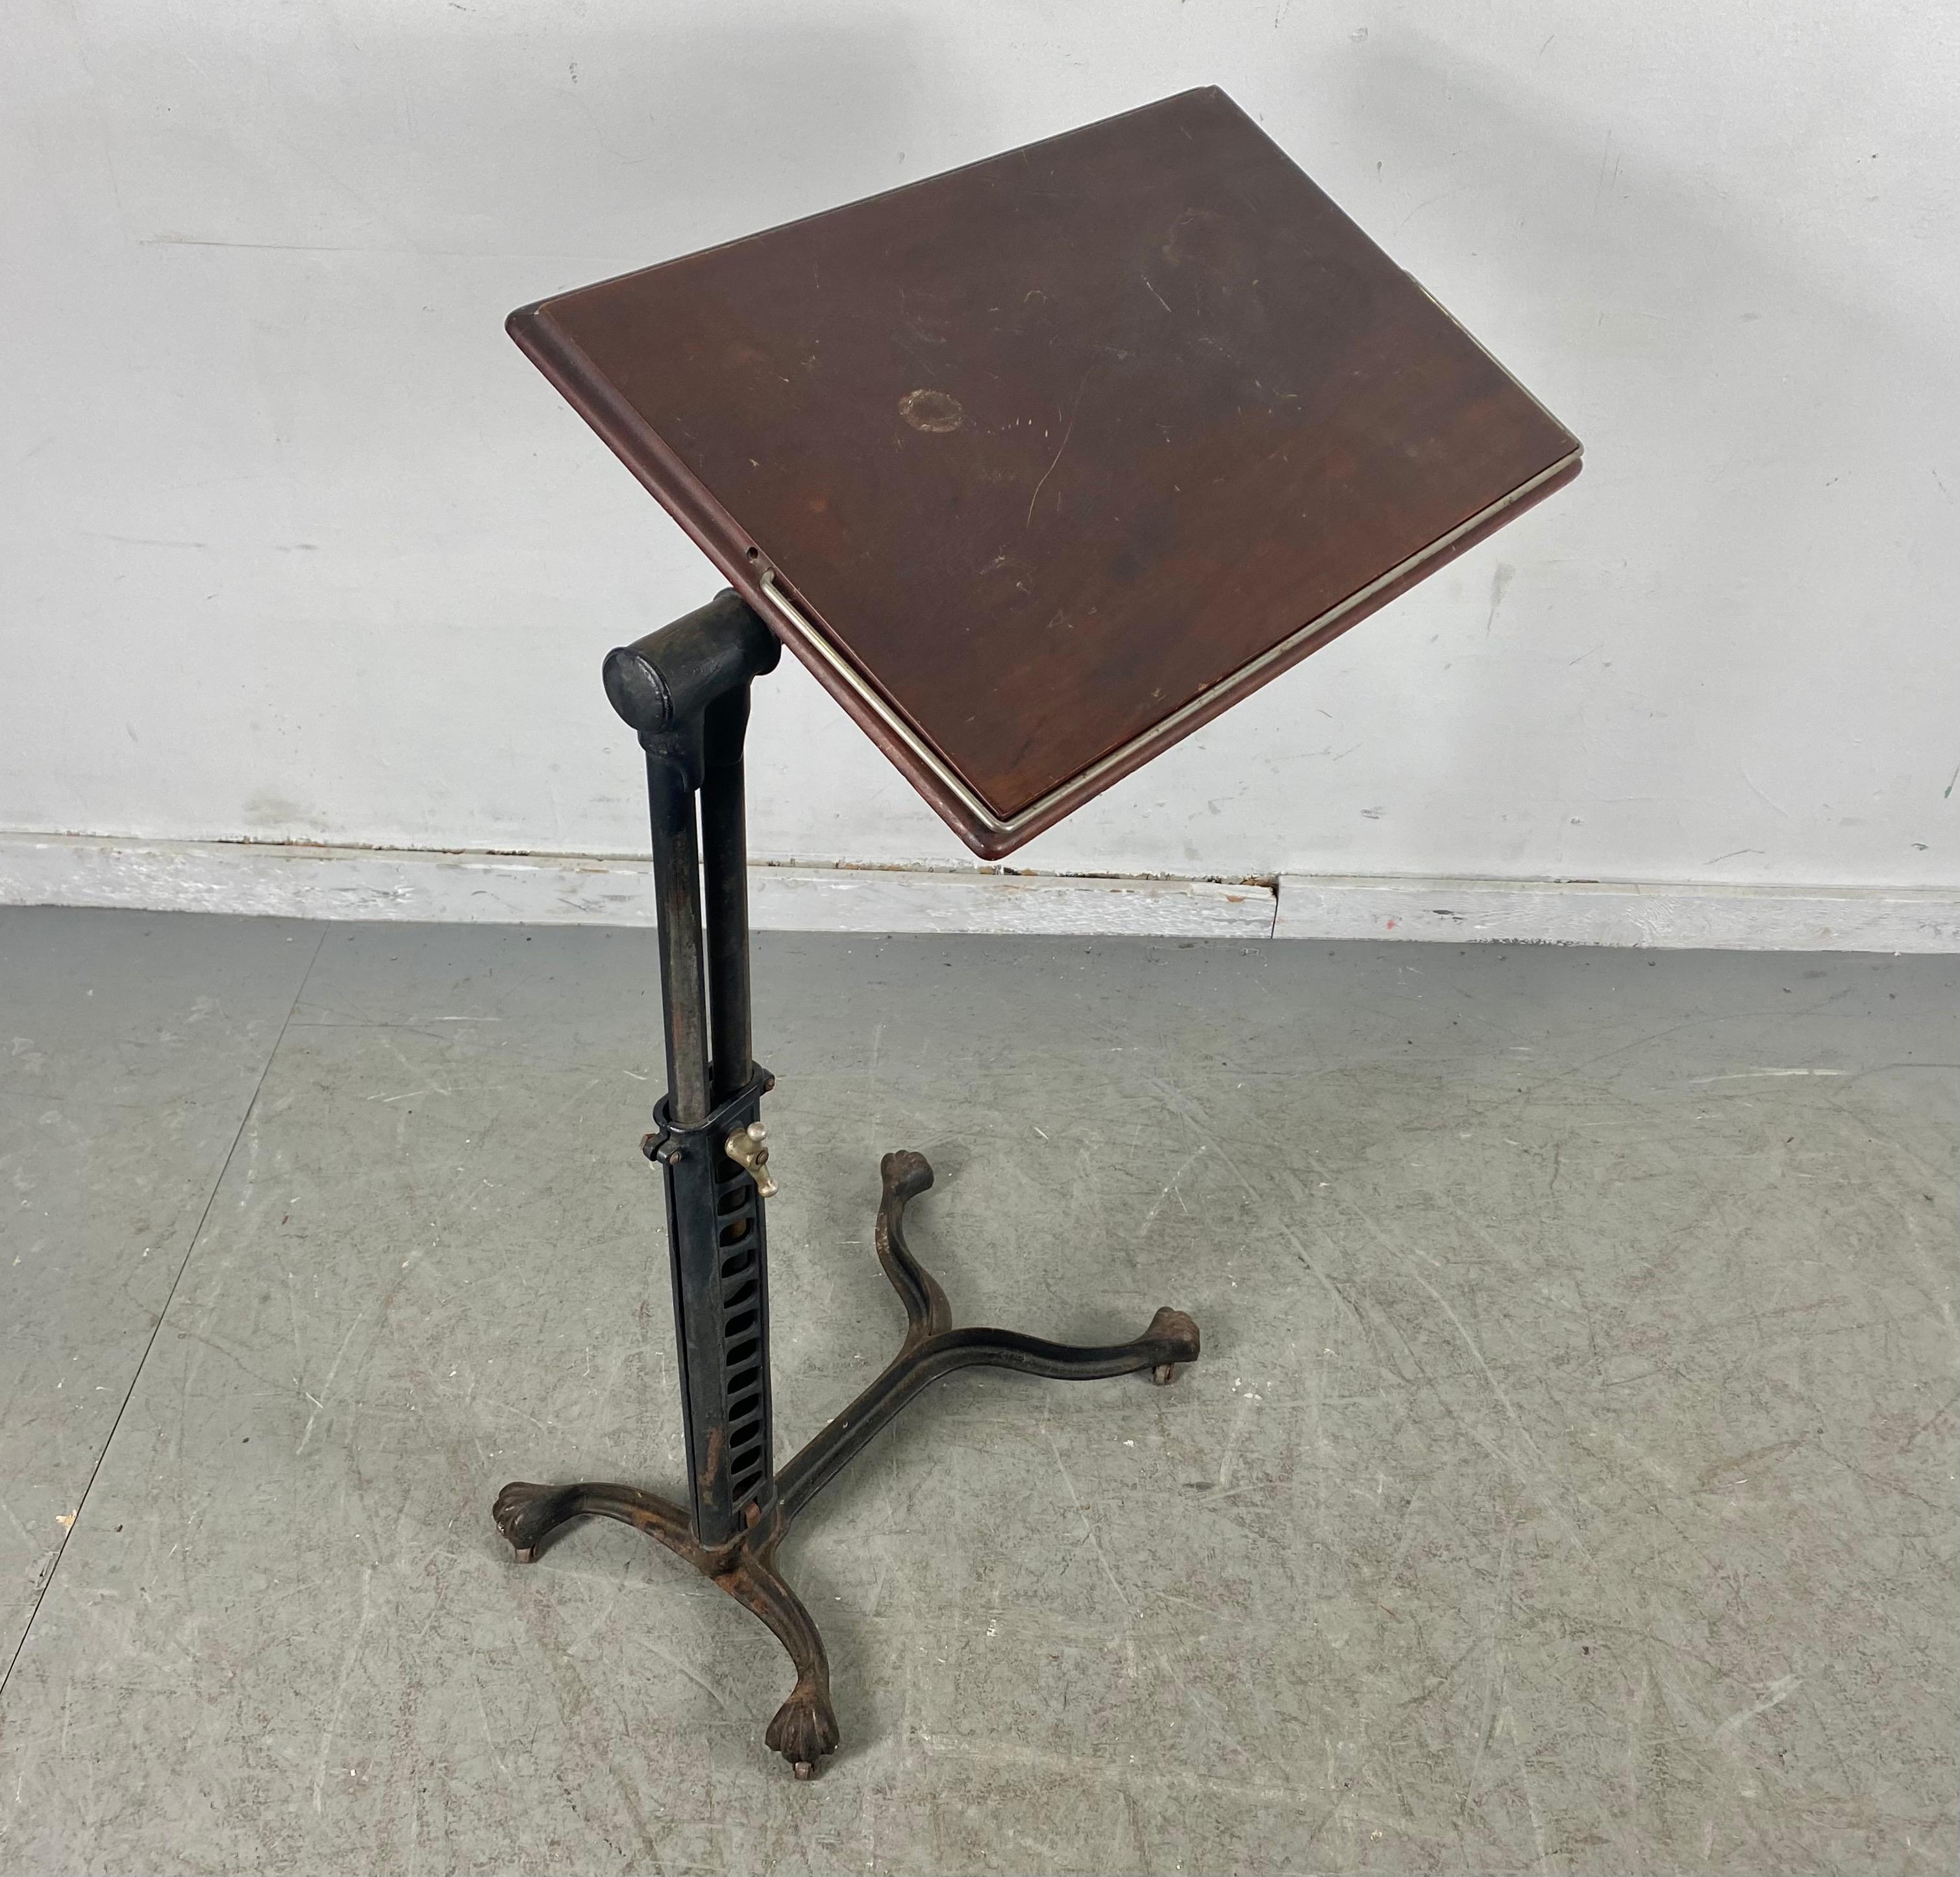 Industrial cast iron and wood adjustable drafting / writing table, unusual mechanism, pierced iron, ball /claw feet, tilt-top, circa 1920s, beautiful design, adjustable height from 26